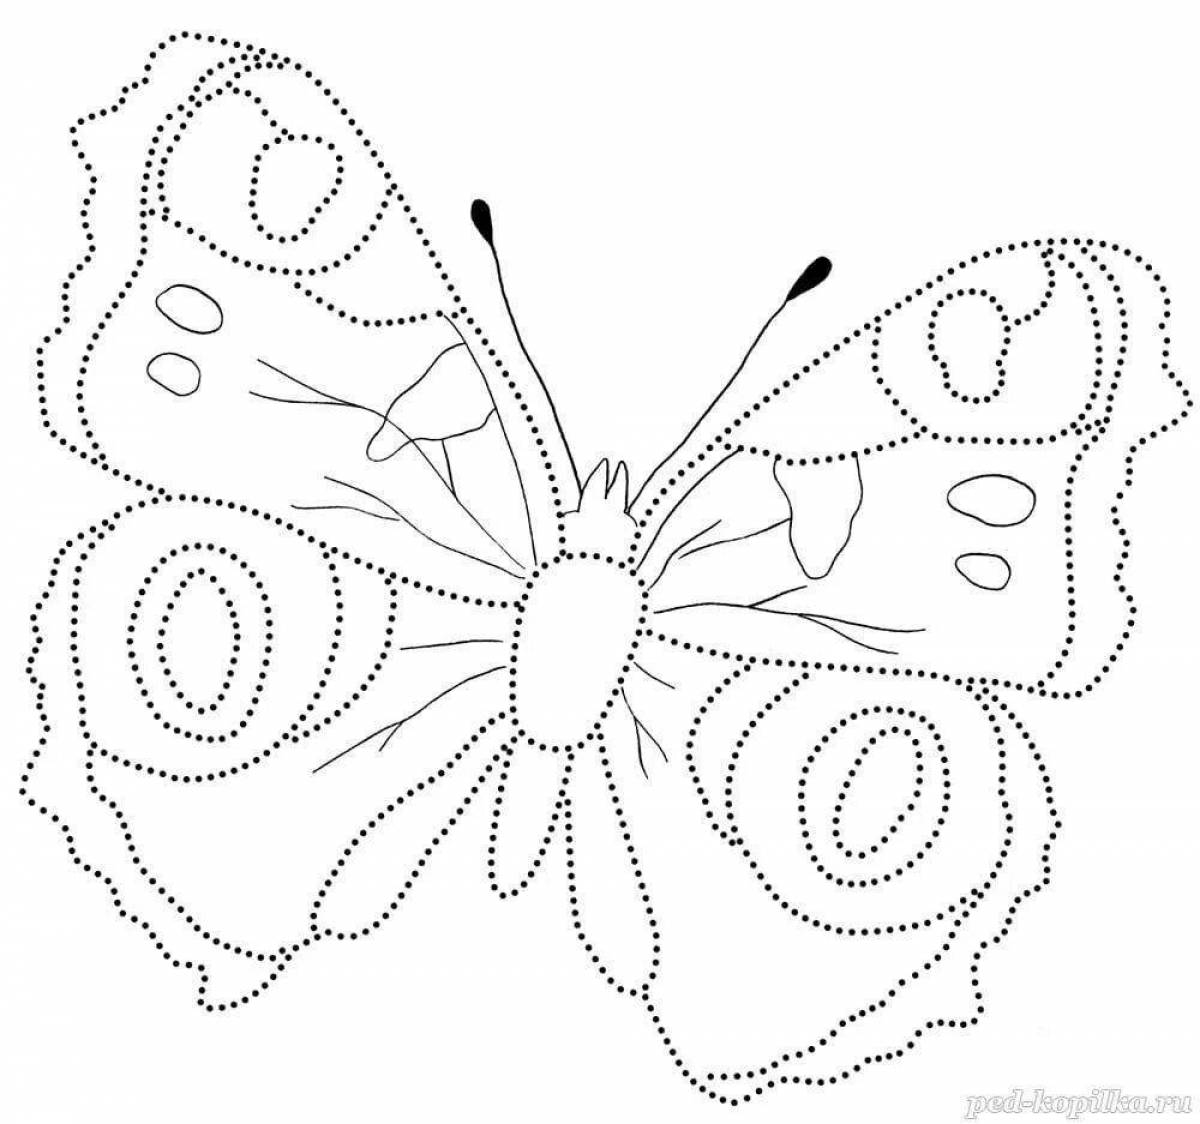 Cute butterfly coloring book for kids